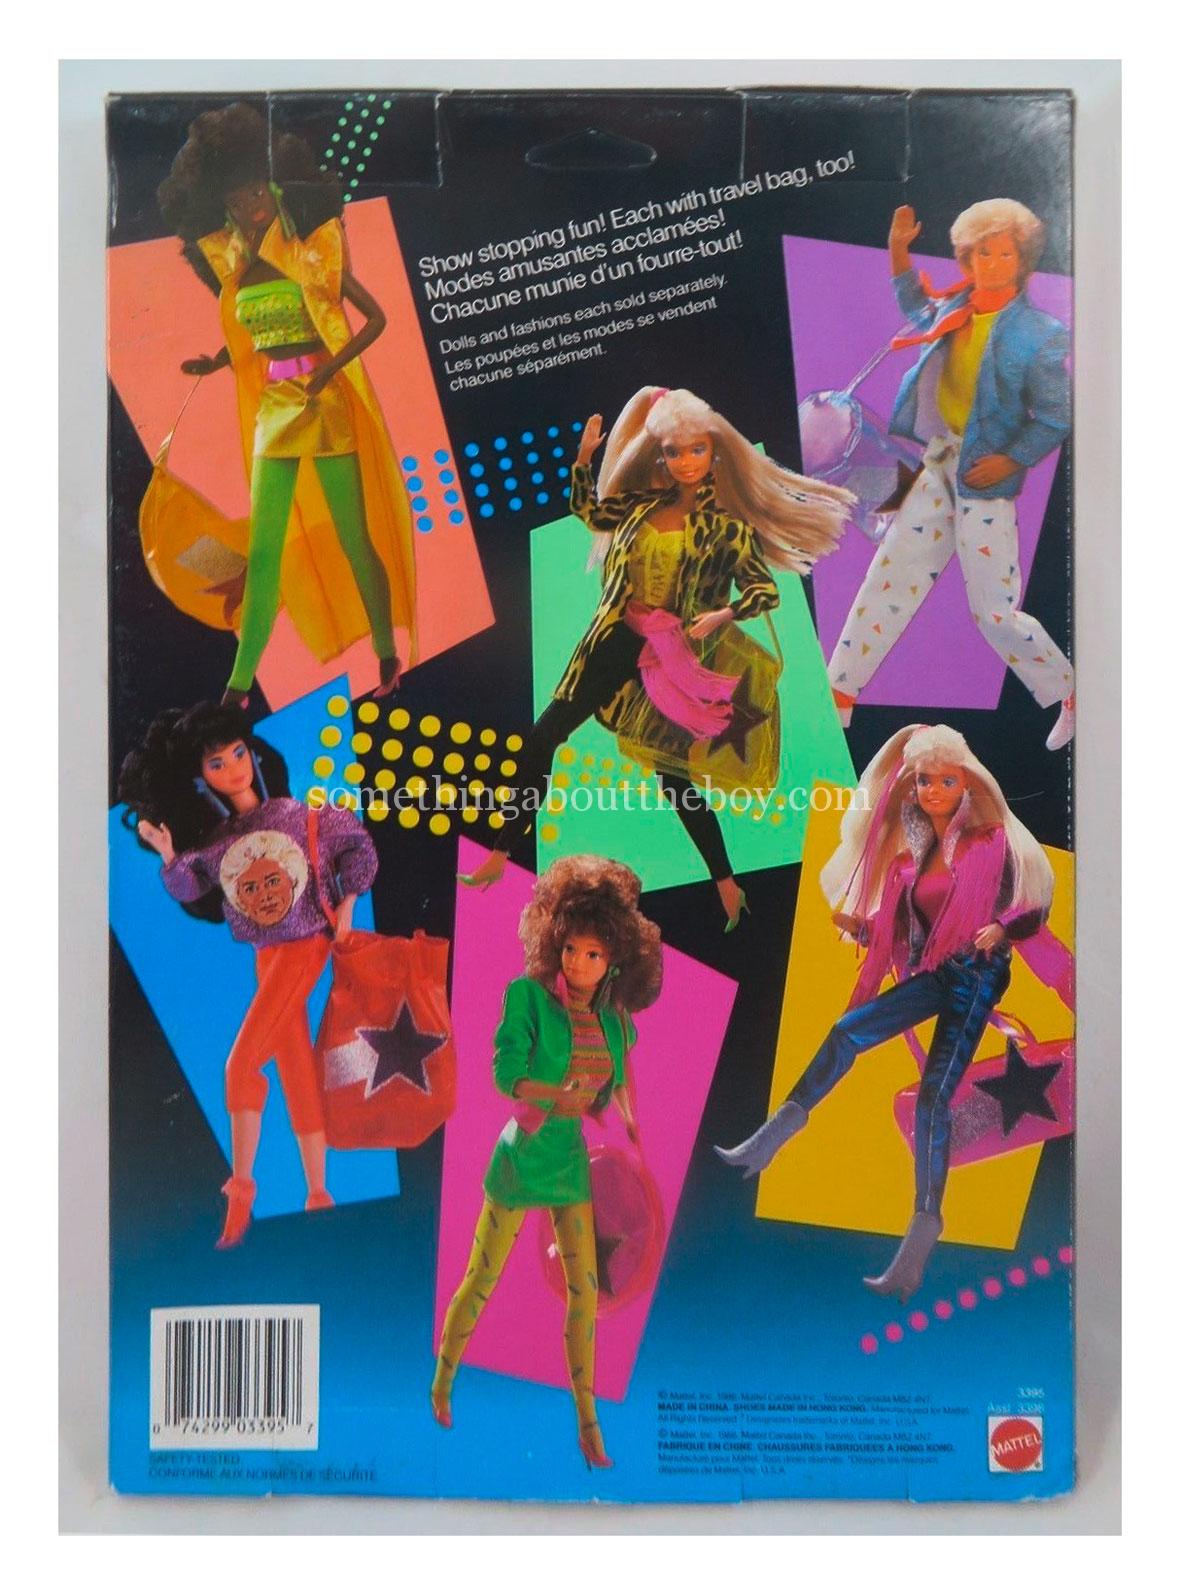 1987 #3395 Tour Fashions (Canadian version) in original packaging